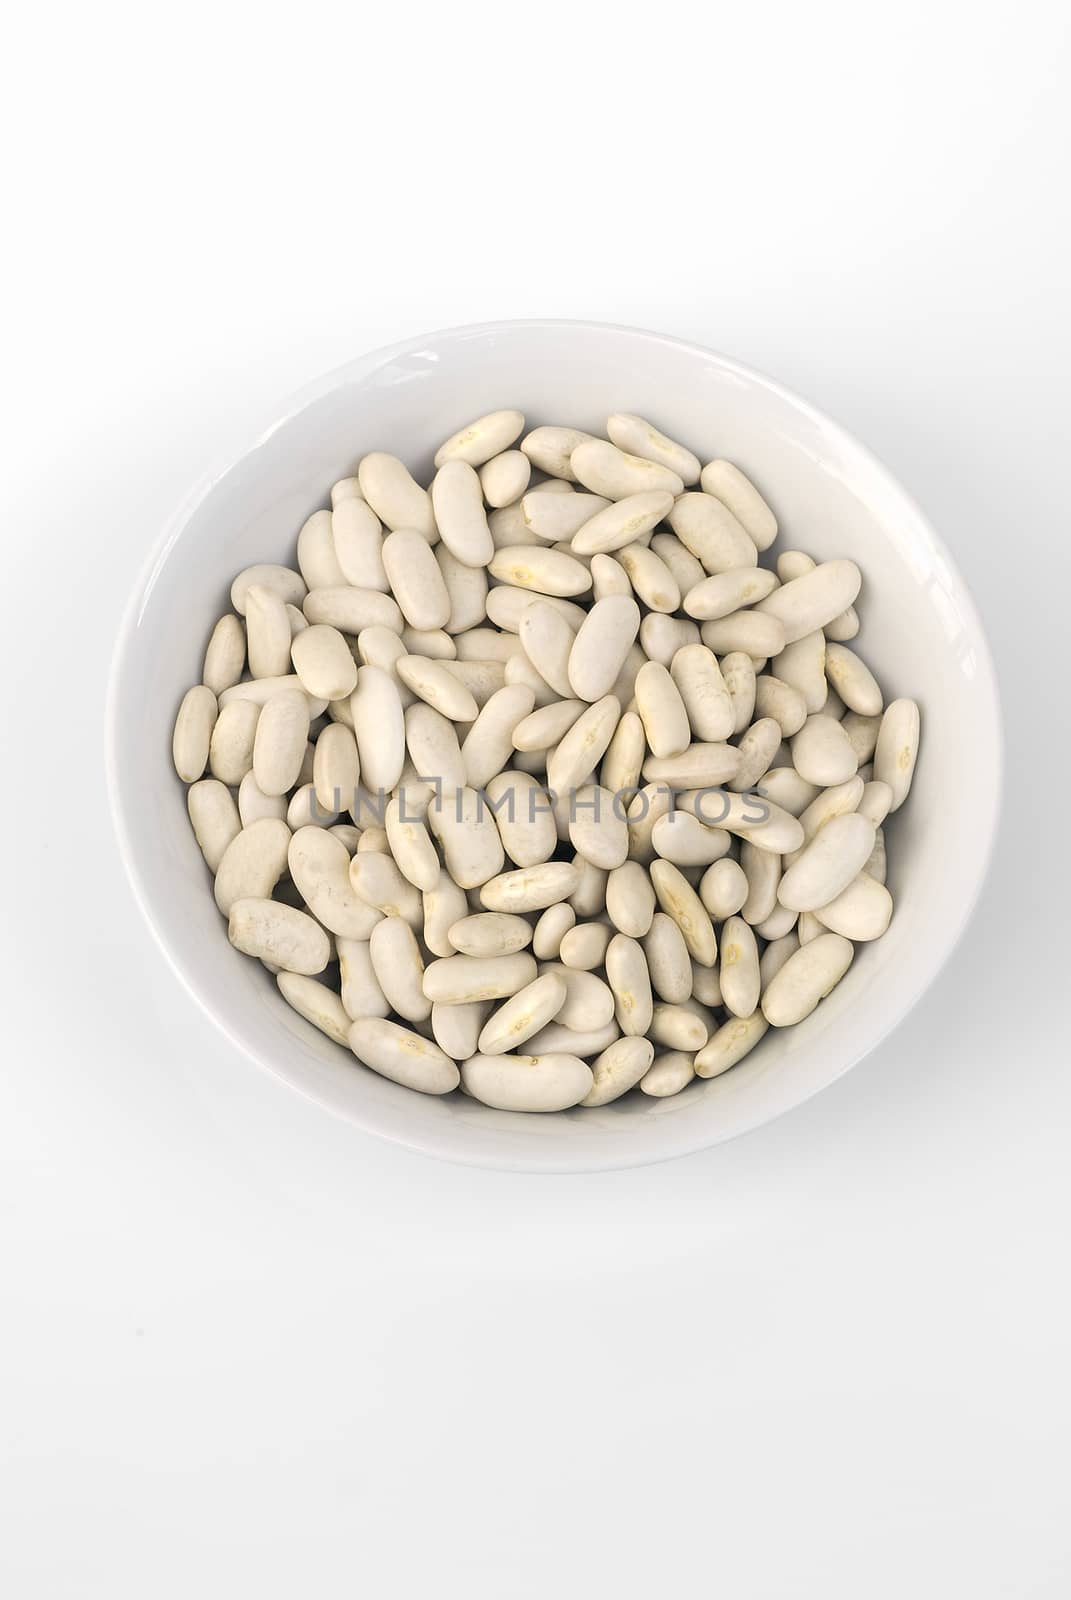 cannellini beans with white ceramic bowl